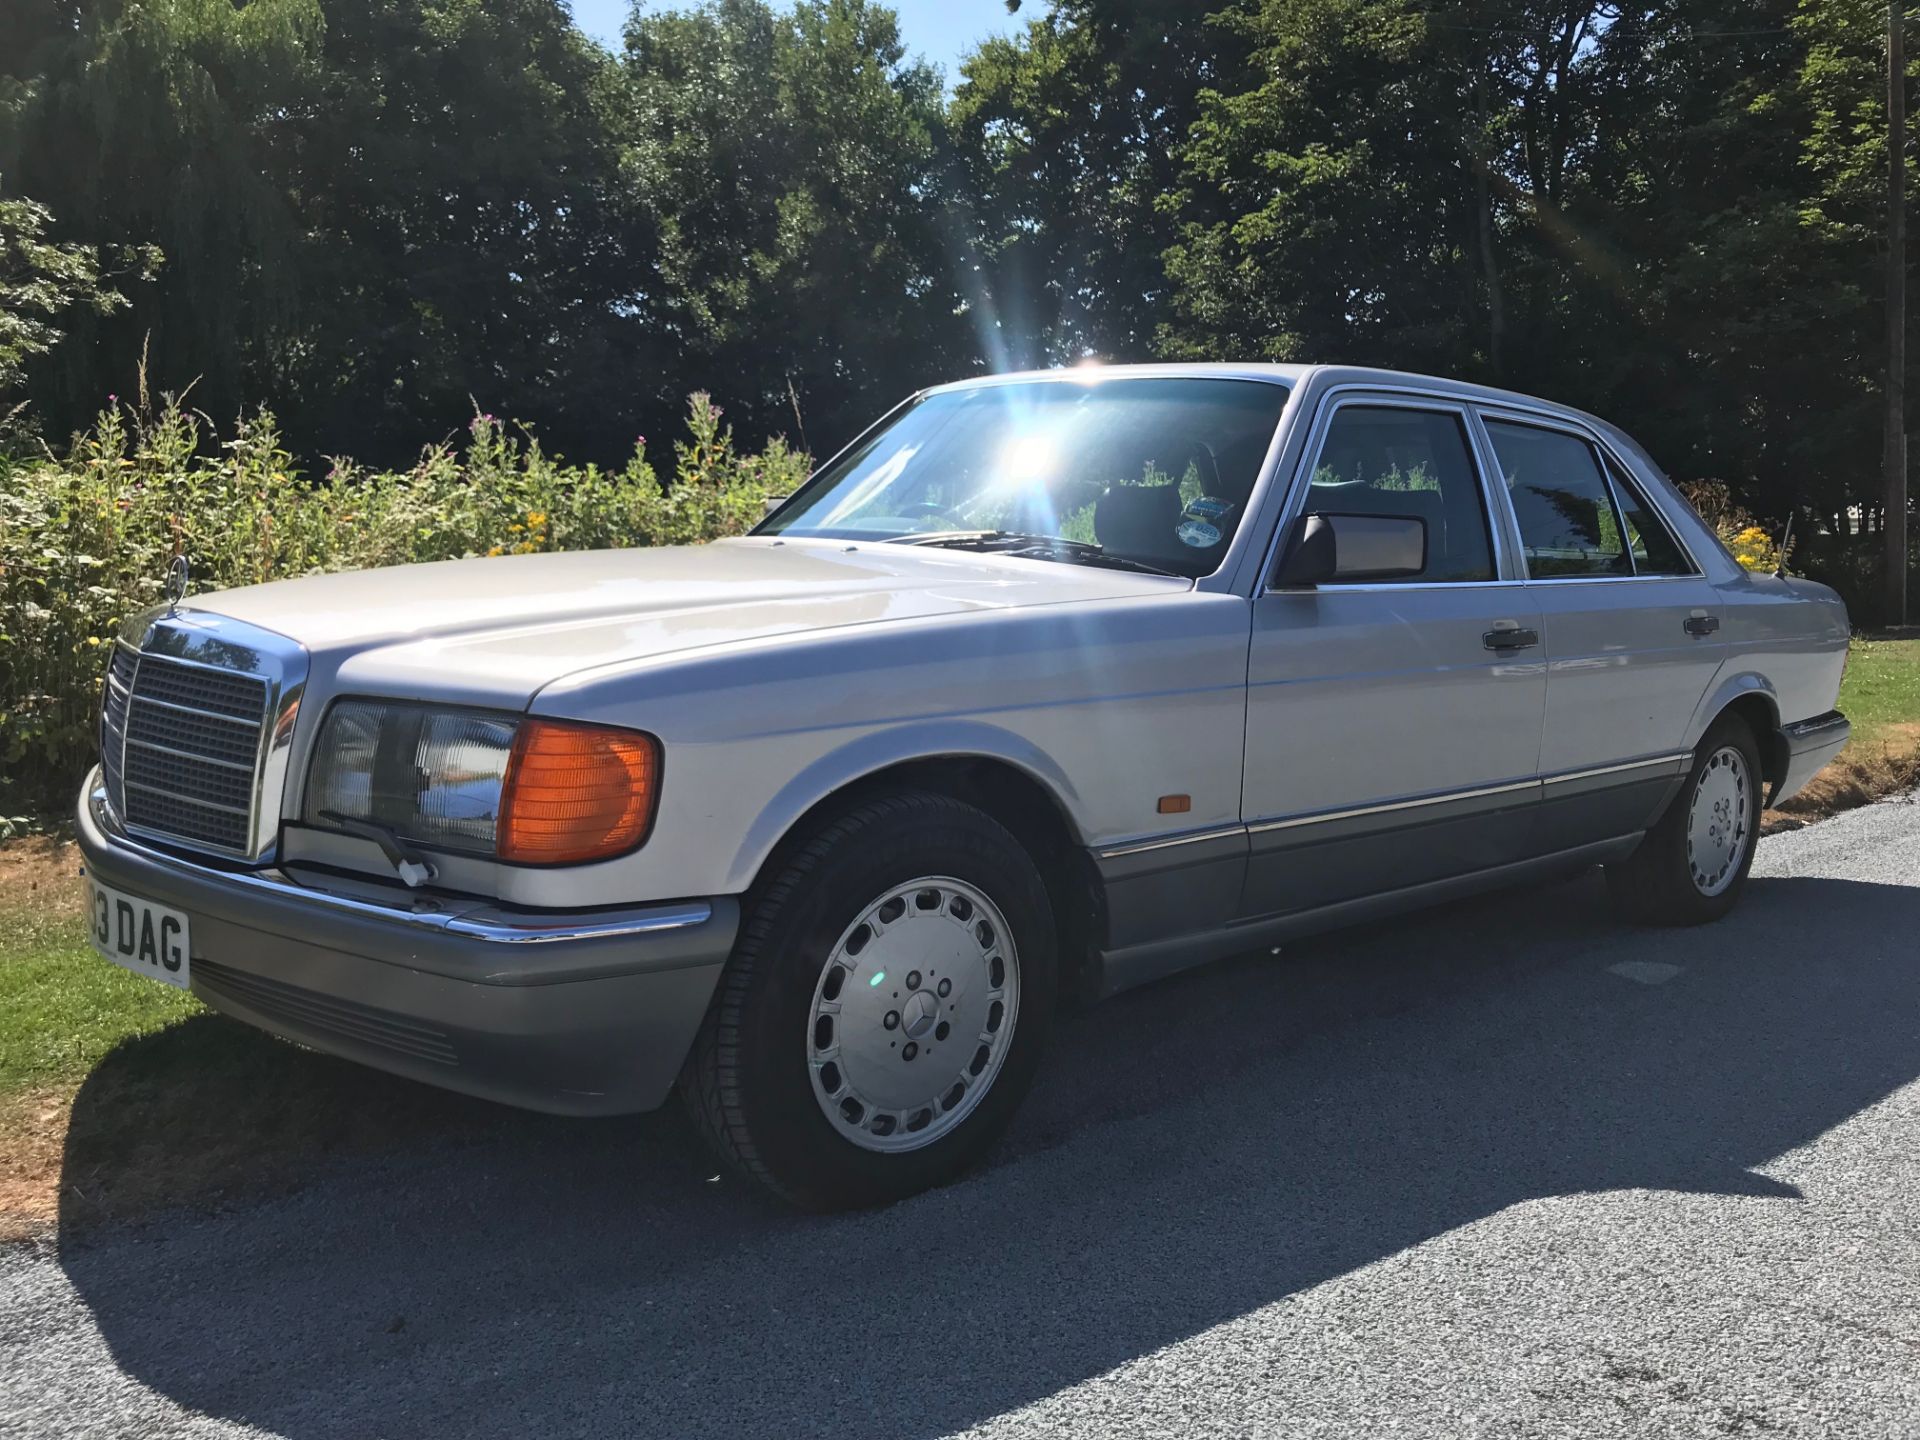 Mercedes 300 SE Automatic - Image 67 of 69